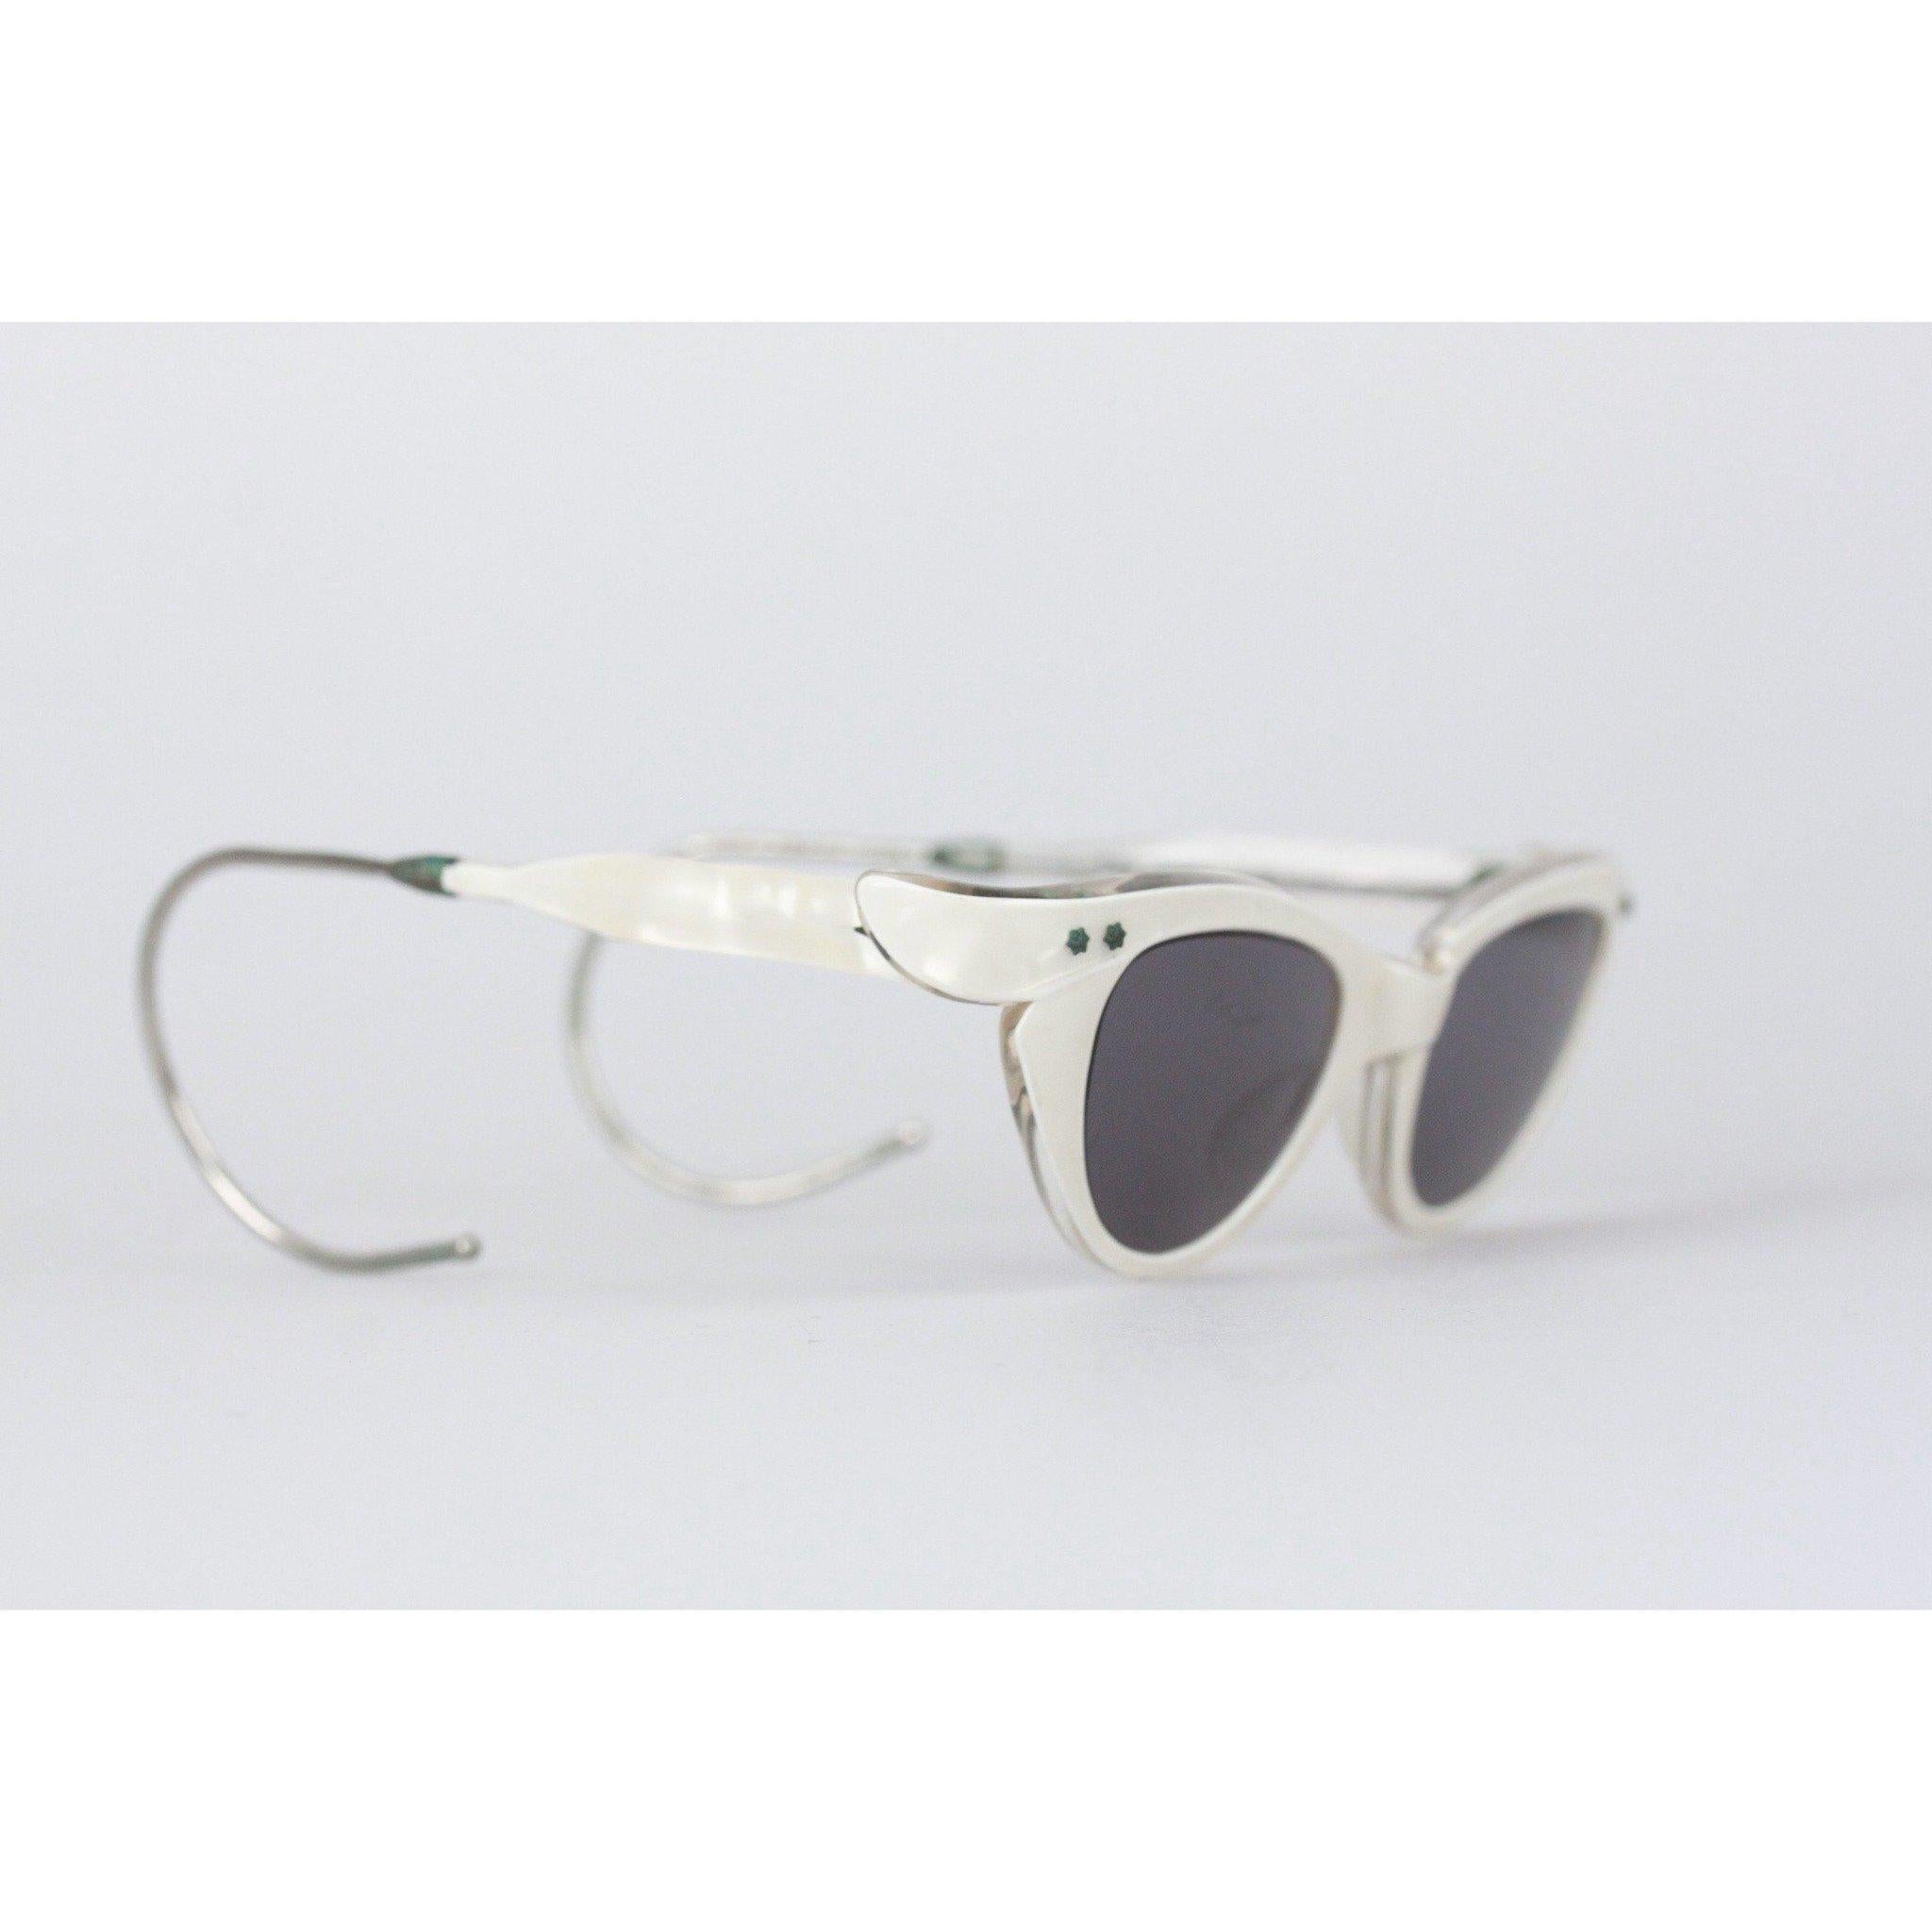 Unique, Rare Vintage SELECTA Tiny - Small cat-eye sunglasses from the 1950s. Made with a white celluloid based frame with wire-wrap earpieces. 100% UV protected lenses. Extra-small size! Front total lenght of the sunglasses is 115mm. Made in